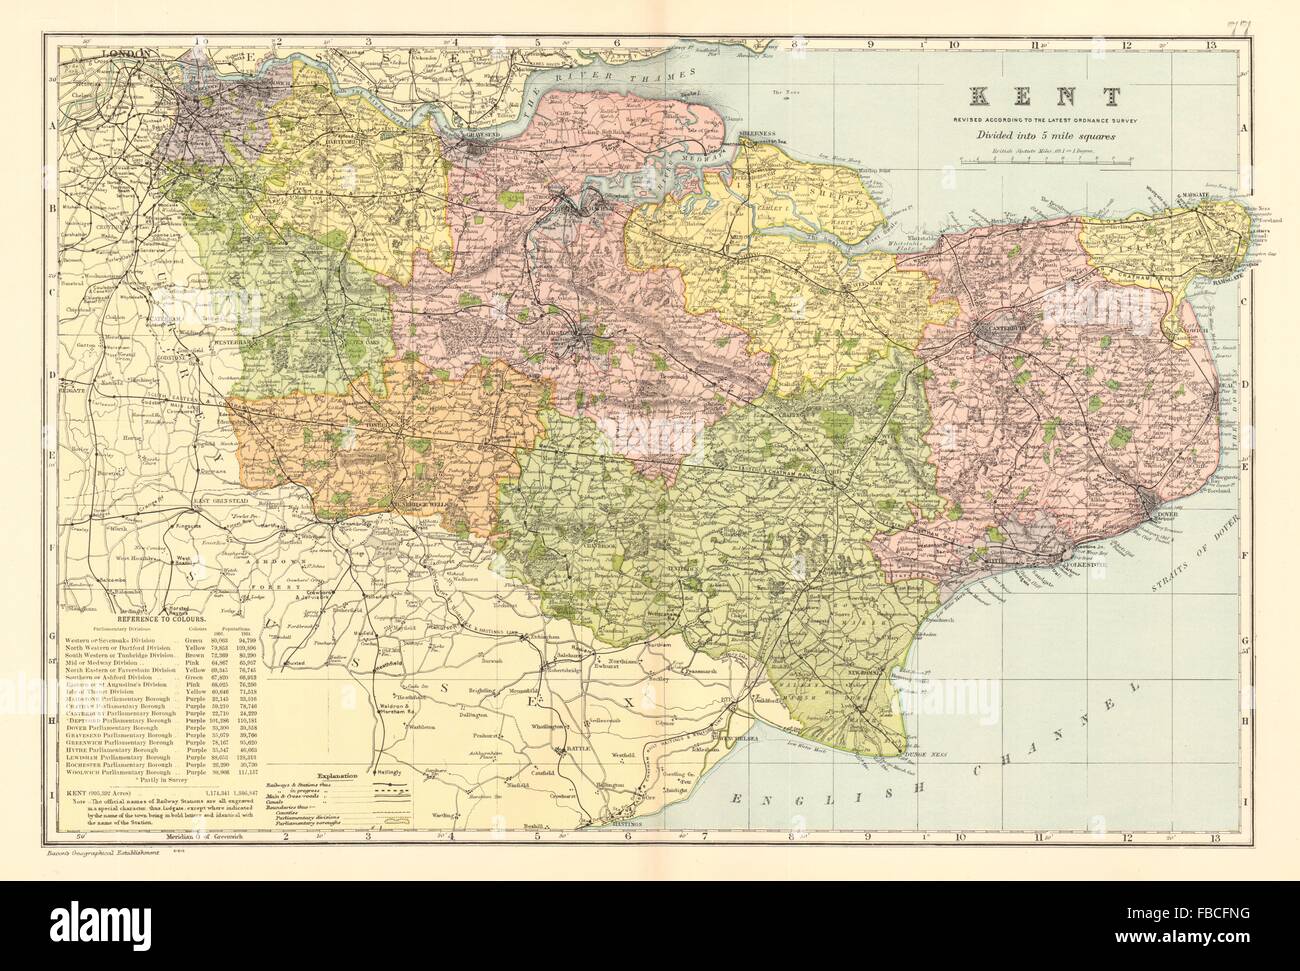 KENT county map. Parliamentary constituencies divisions. Railways. BACON 1903 Stock Photo